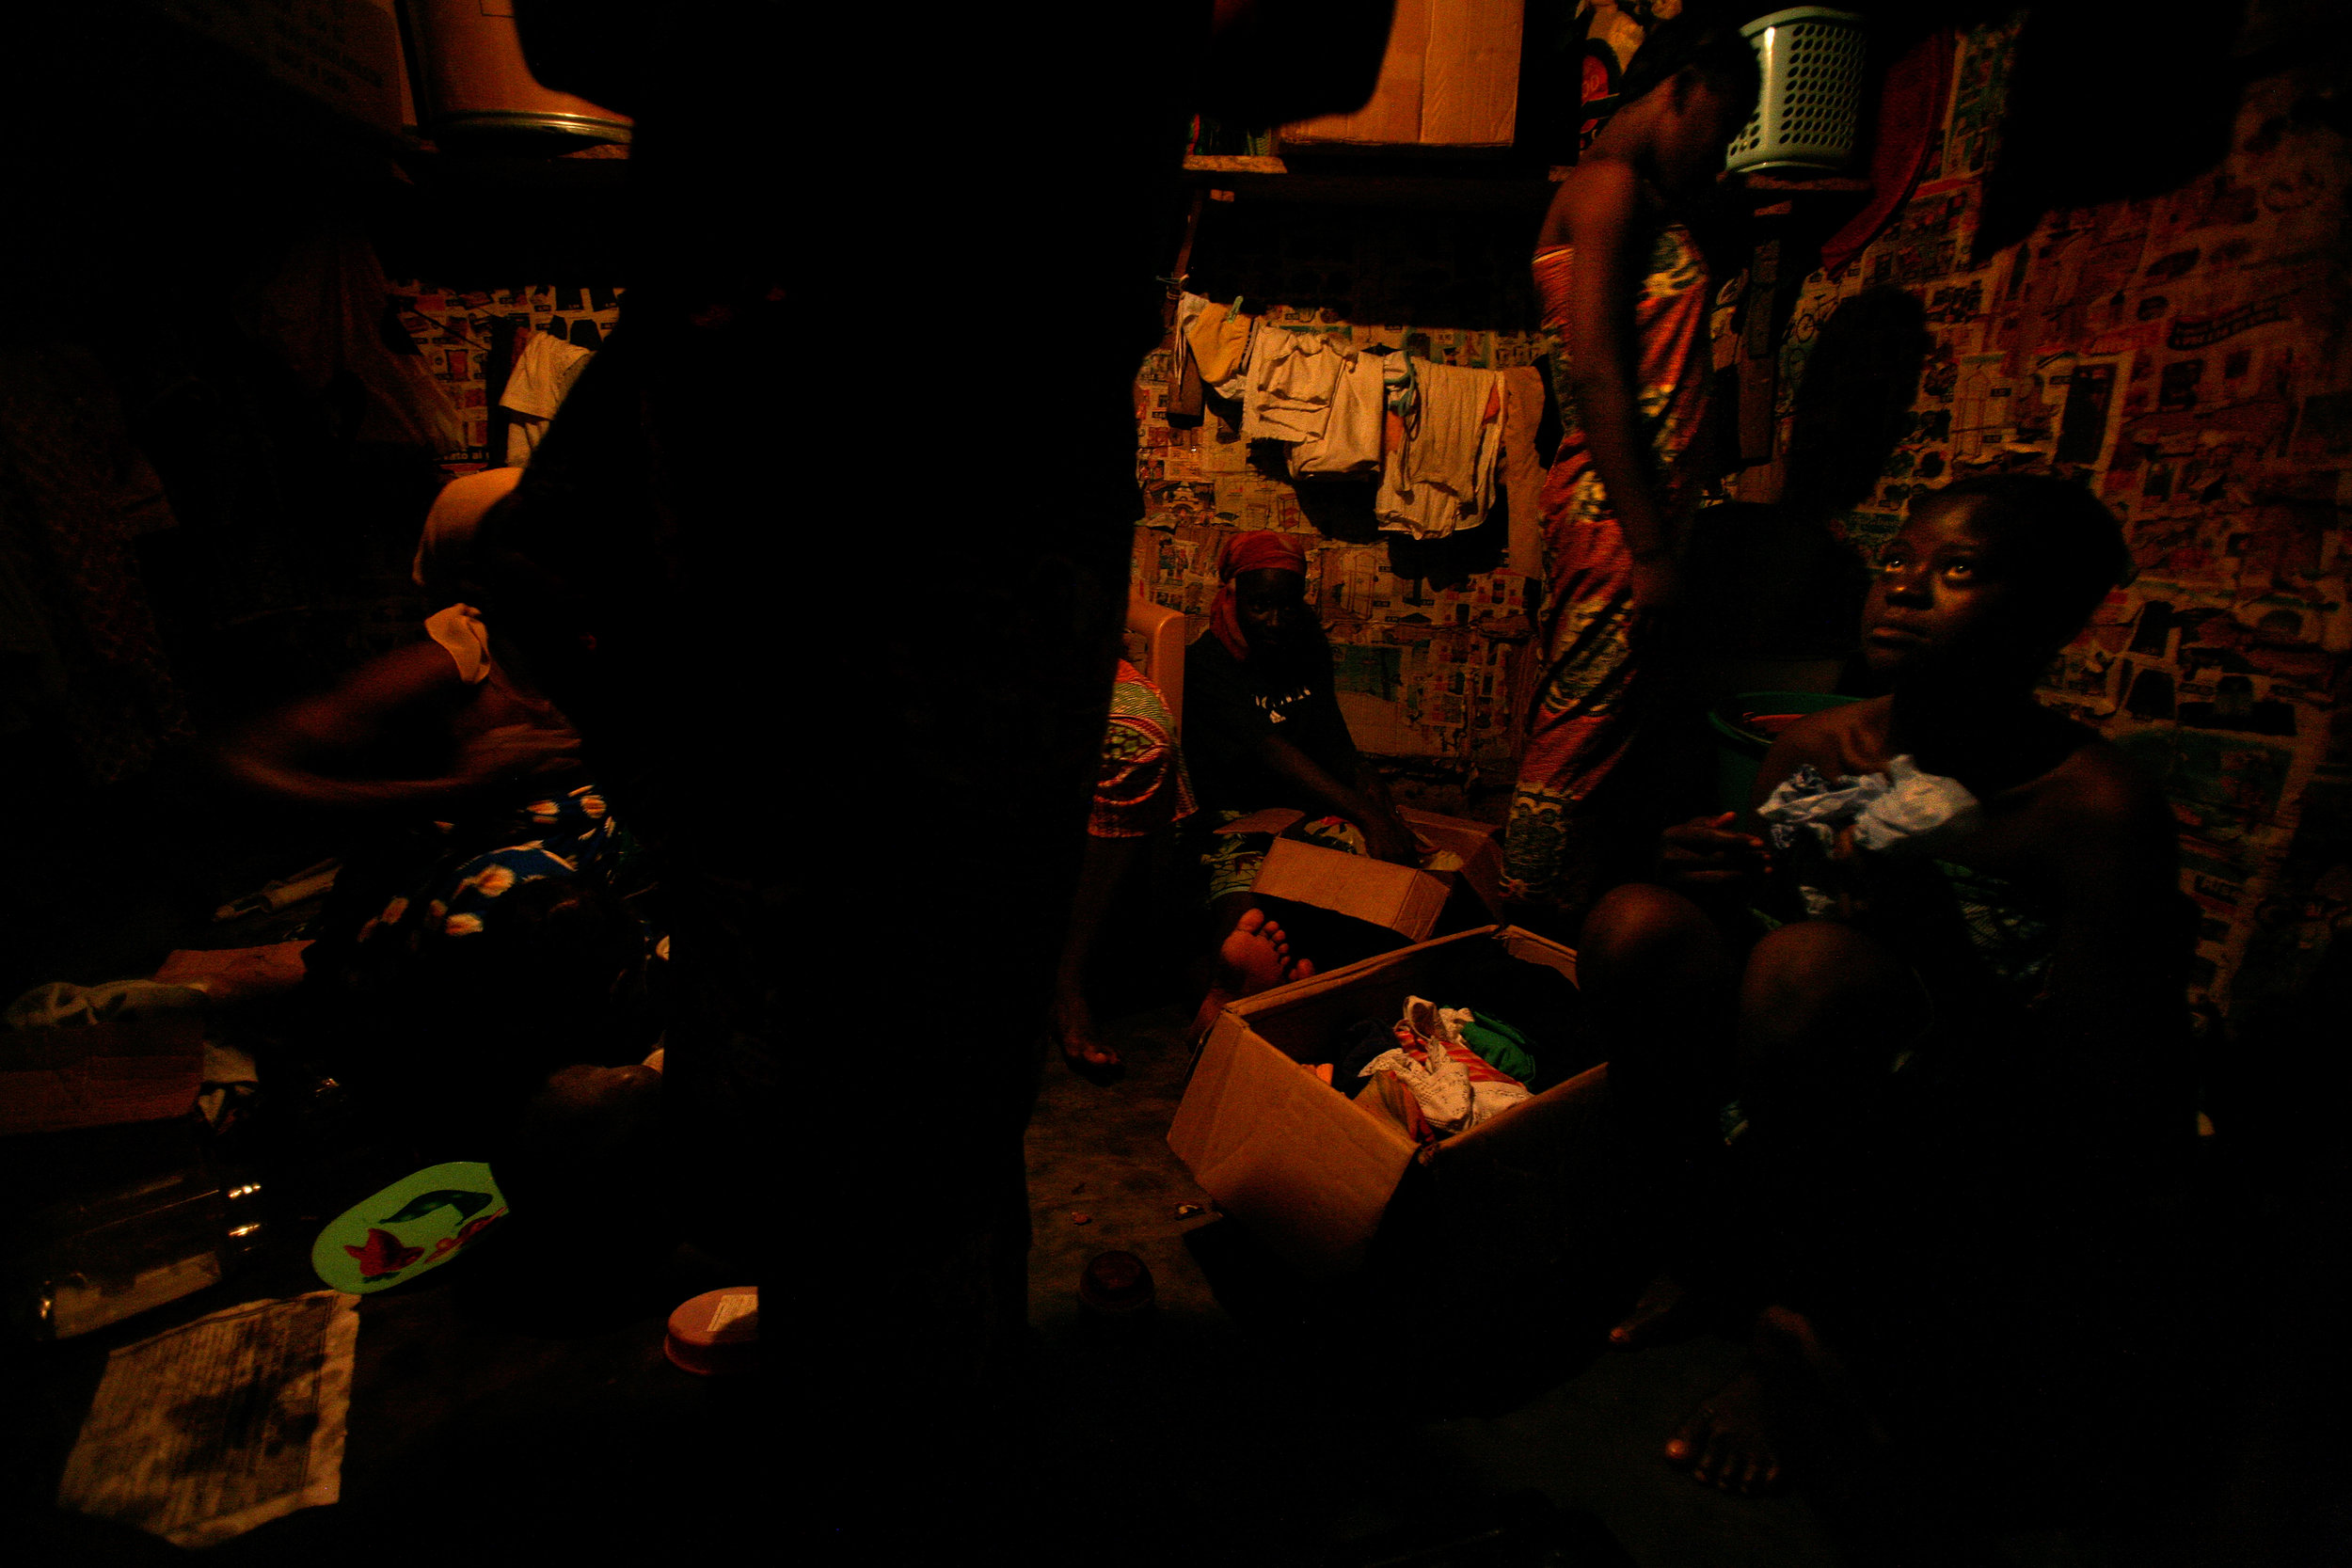  Kayayo girls in their early teens prepare to sleep after the workday in Old Fadama slum in Accra, Ghana on Feb. 9, 2009. 14 girls from the same village sleep on the floor of this wooden shack. 